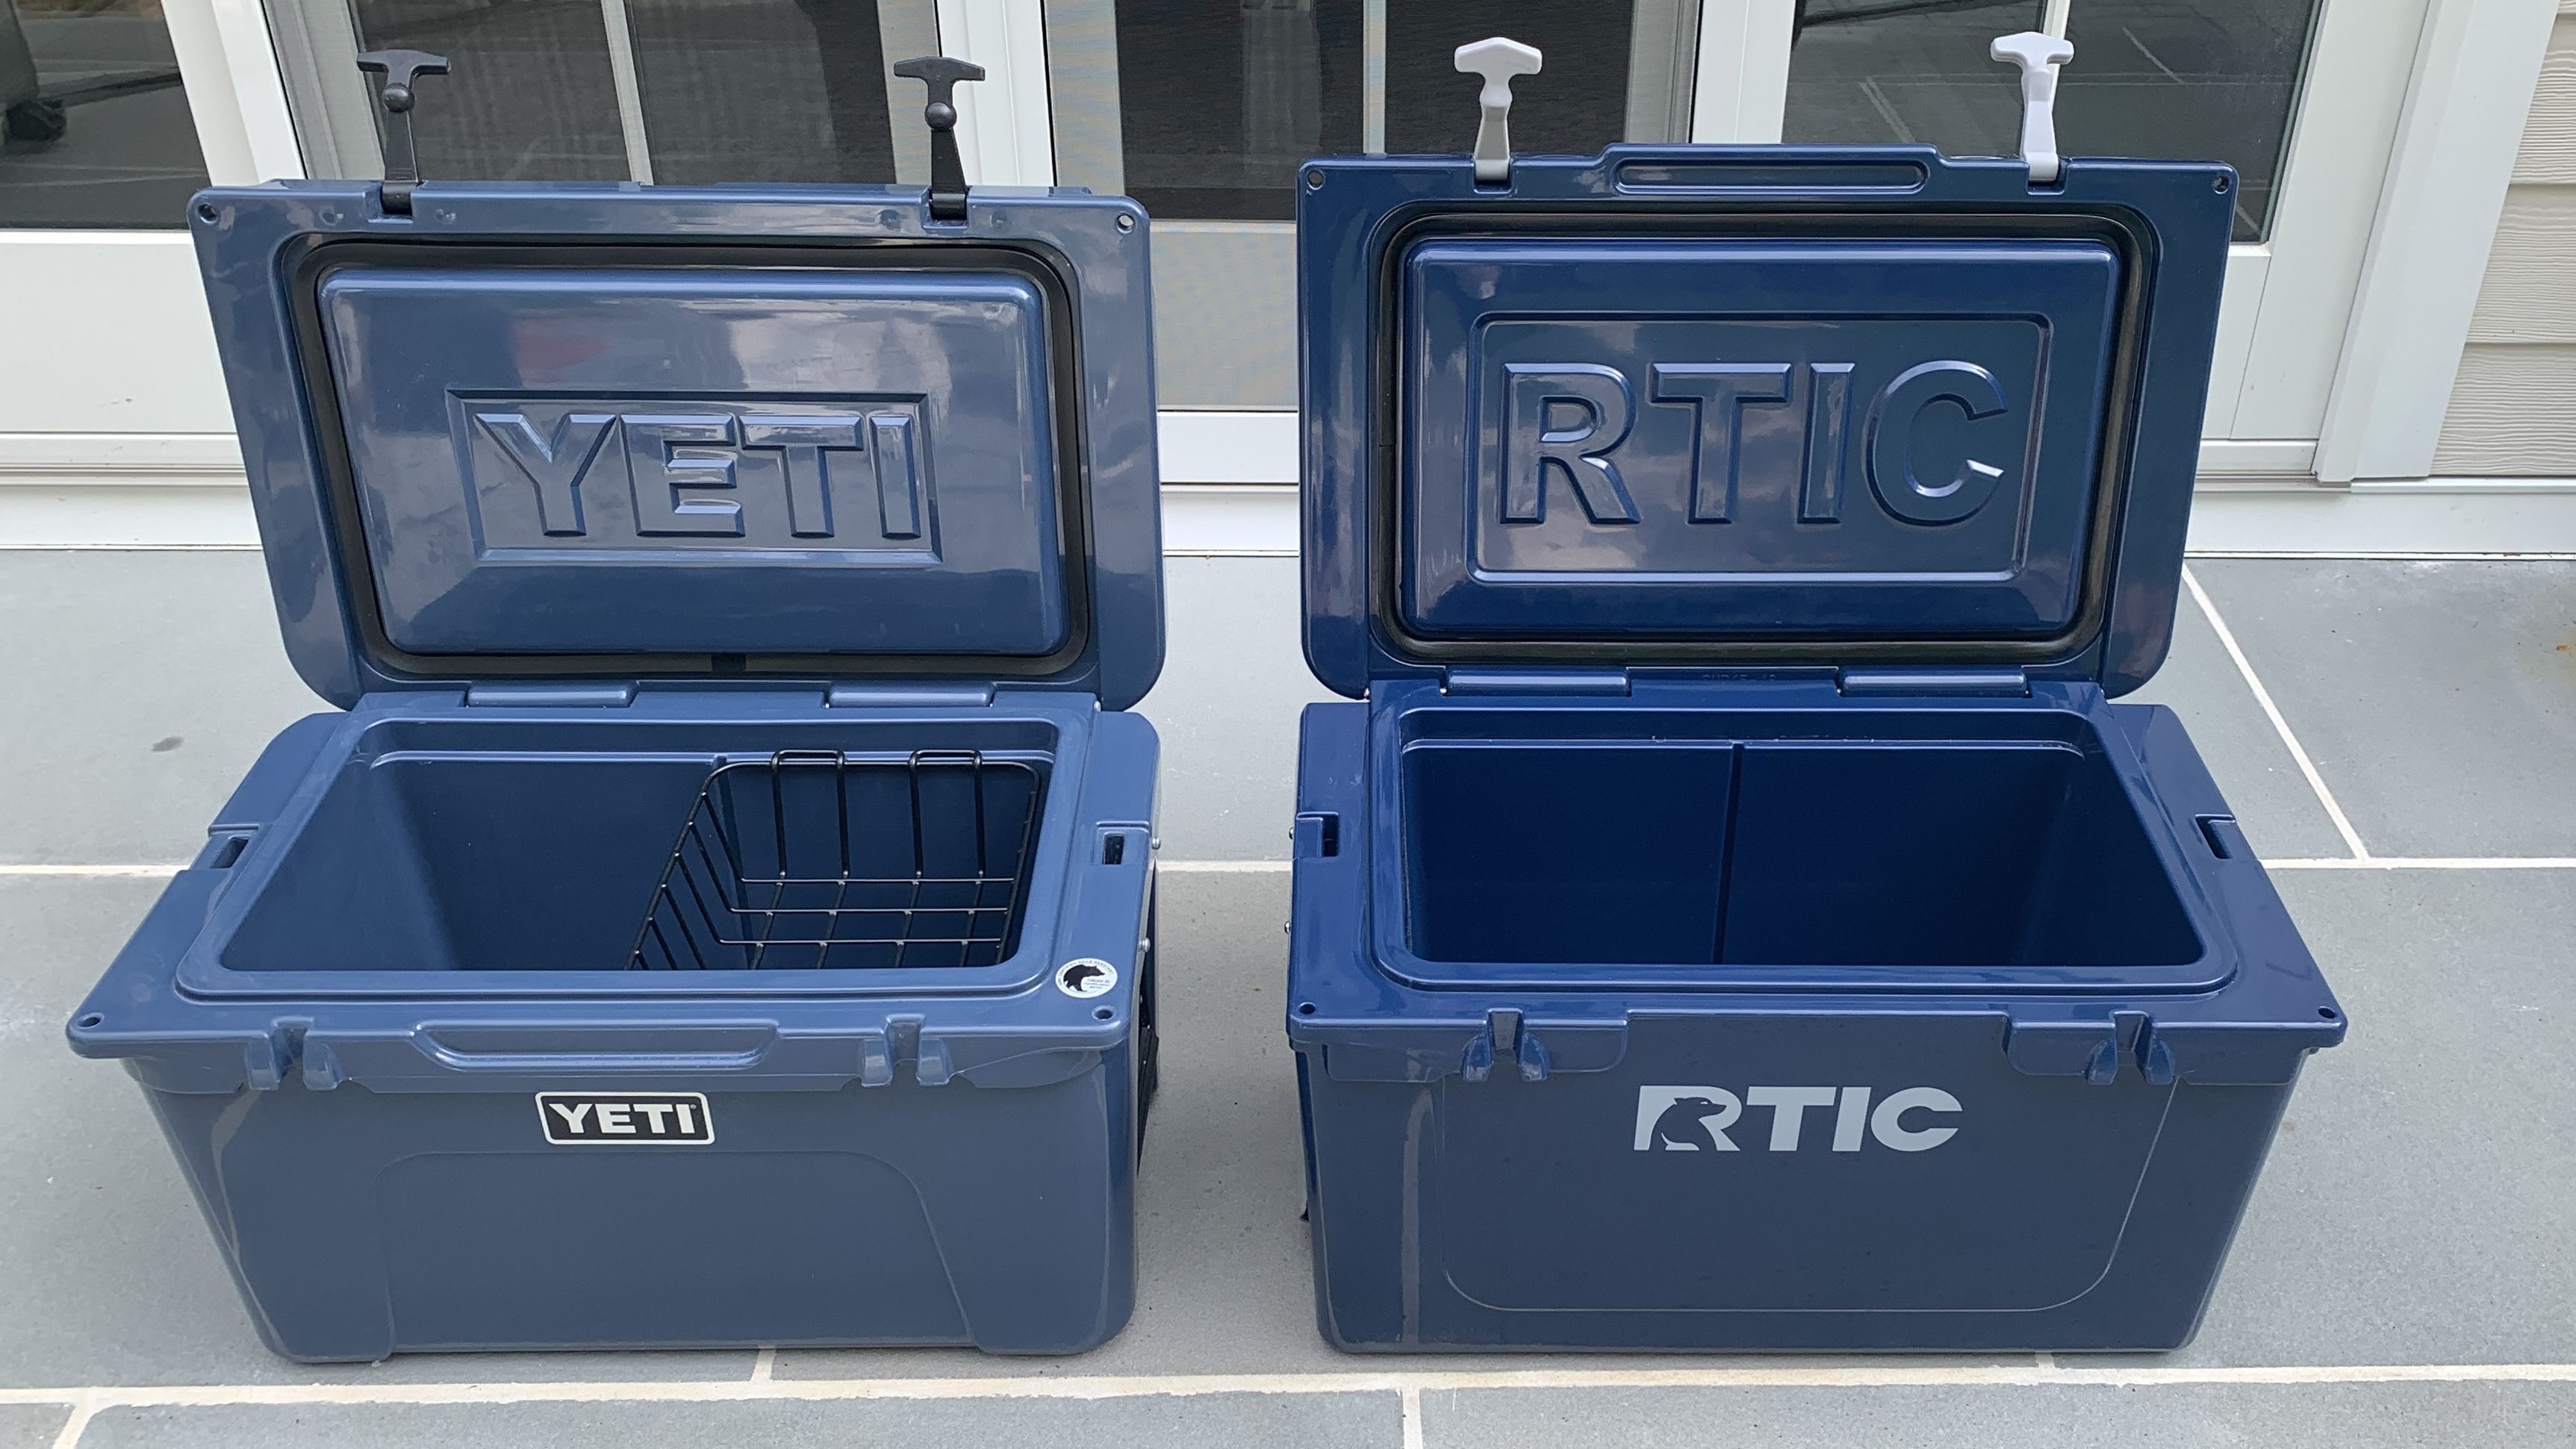 RTIC 45 -REALISTIC COOLER REVIEW 